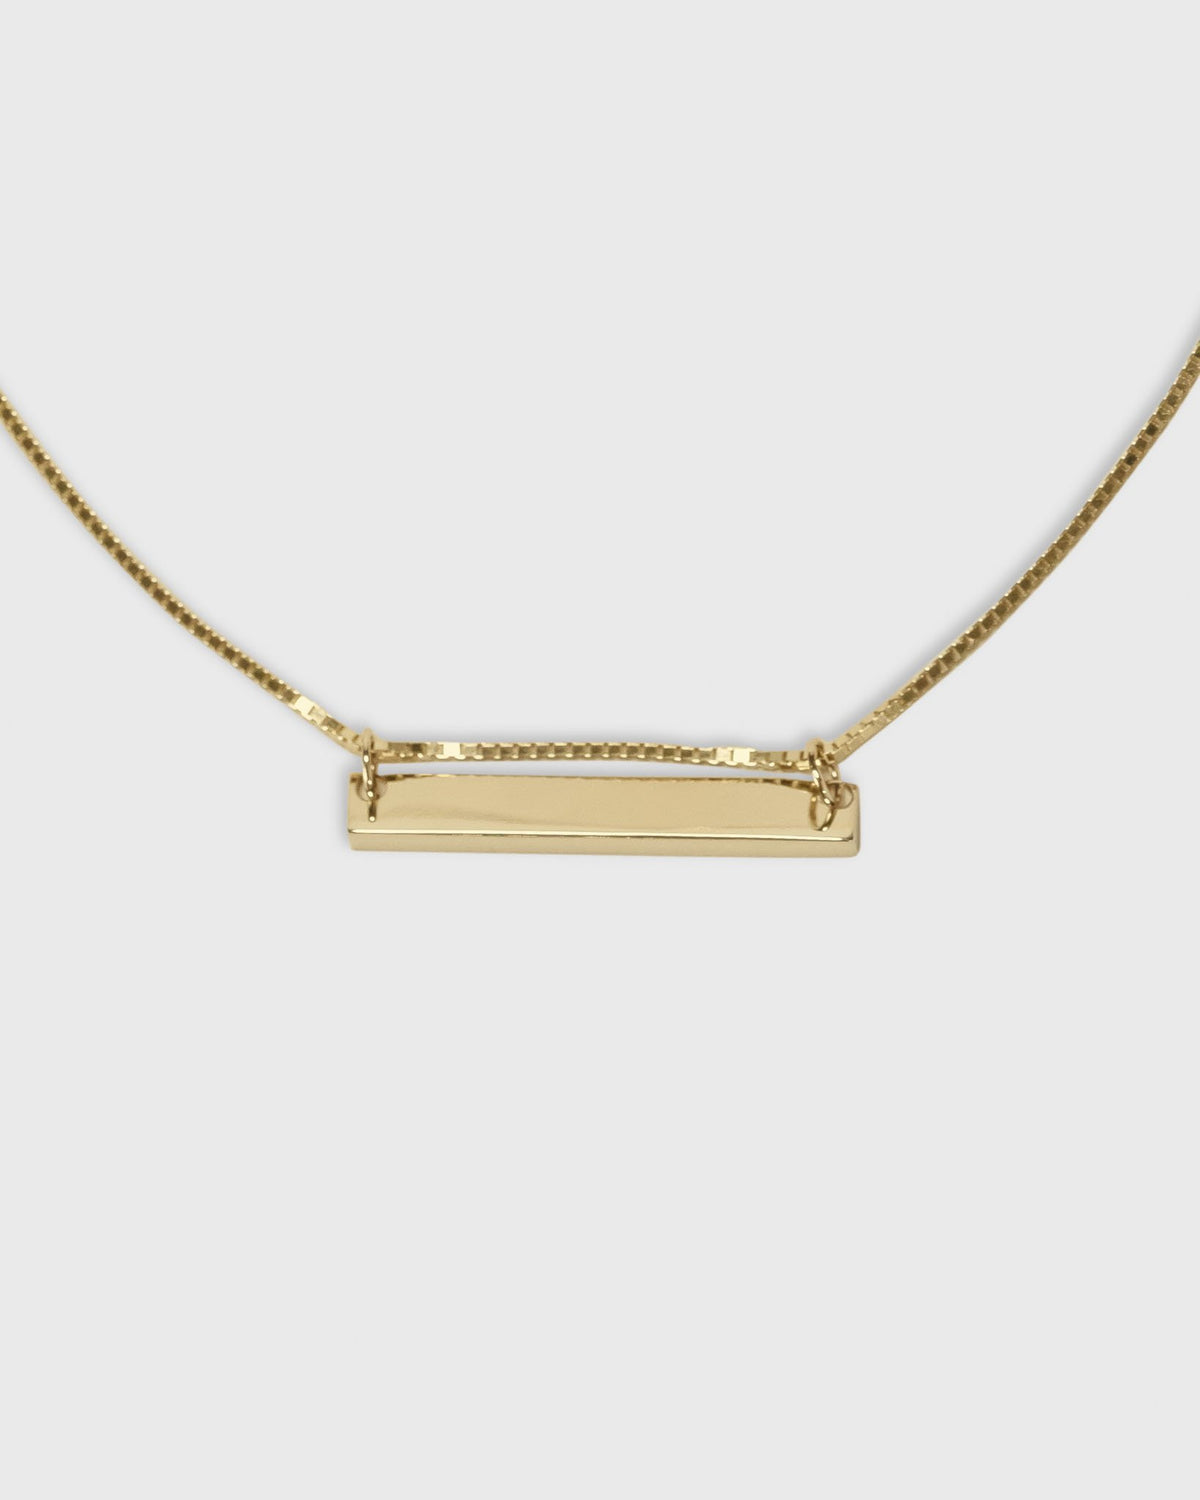 tri pendant in solid 14k yellow gold